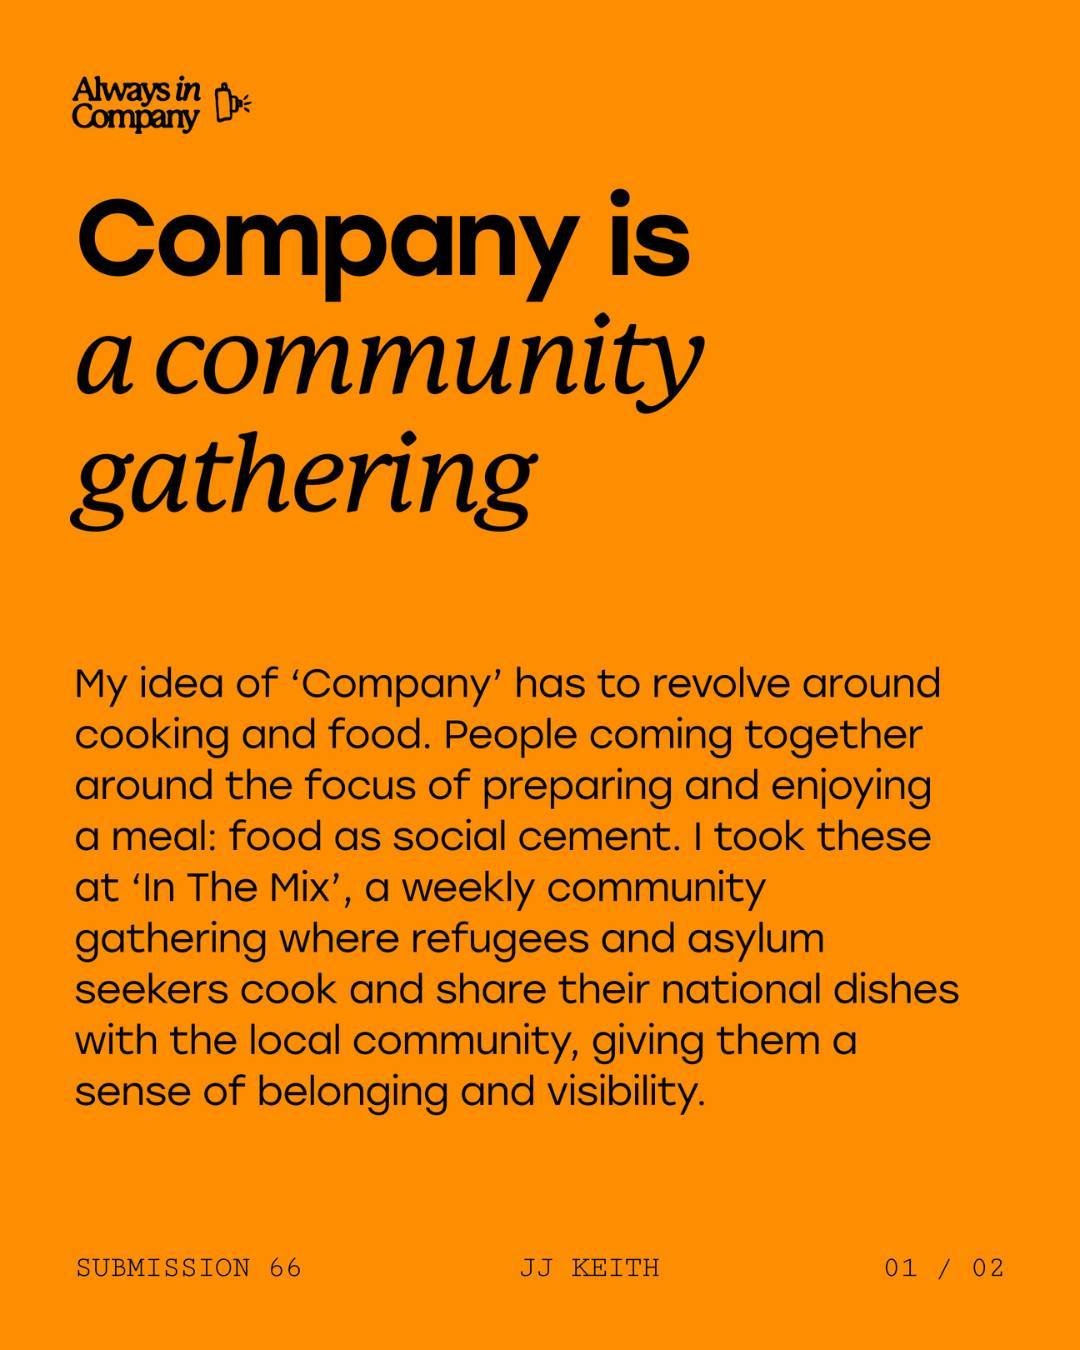 Company can be defined as 'community gathering'.

For so many, the concept of gathering for a meal or occasions centering around food, is key to bringing people together. This submission shows refugees and asylum seekers sharing their dishes with the